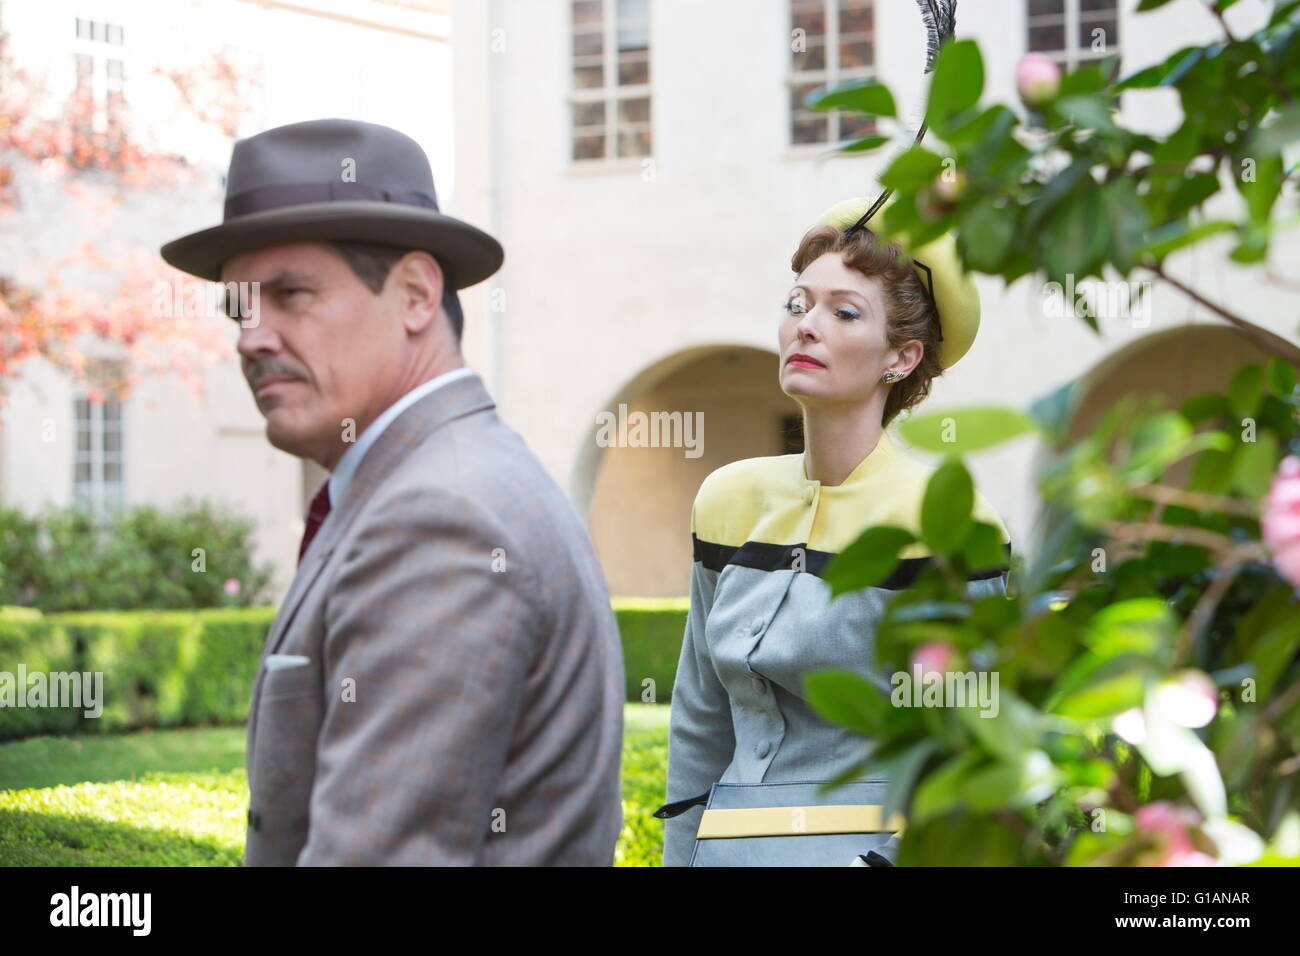 RELEASE DATE: February 5, 2016 TITLE: Hail, Caesar! STUDIO: Universal Pictures DIRECTOR: Ethan Coen, Joel Coen PLOT: A Hollywood fixer in the 1950s works to keep the studio's stars in line PICTURED: Josh Brolin, Tilda Swinton (Credit: c Universal Pictures/Entertainment Pictures/) Stock Photo